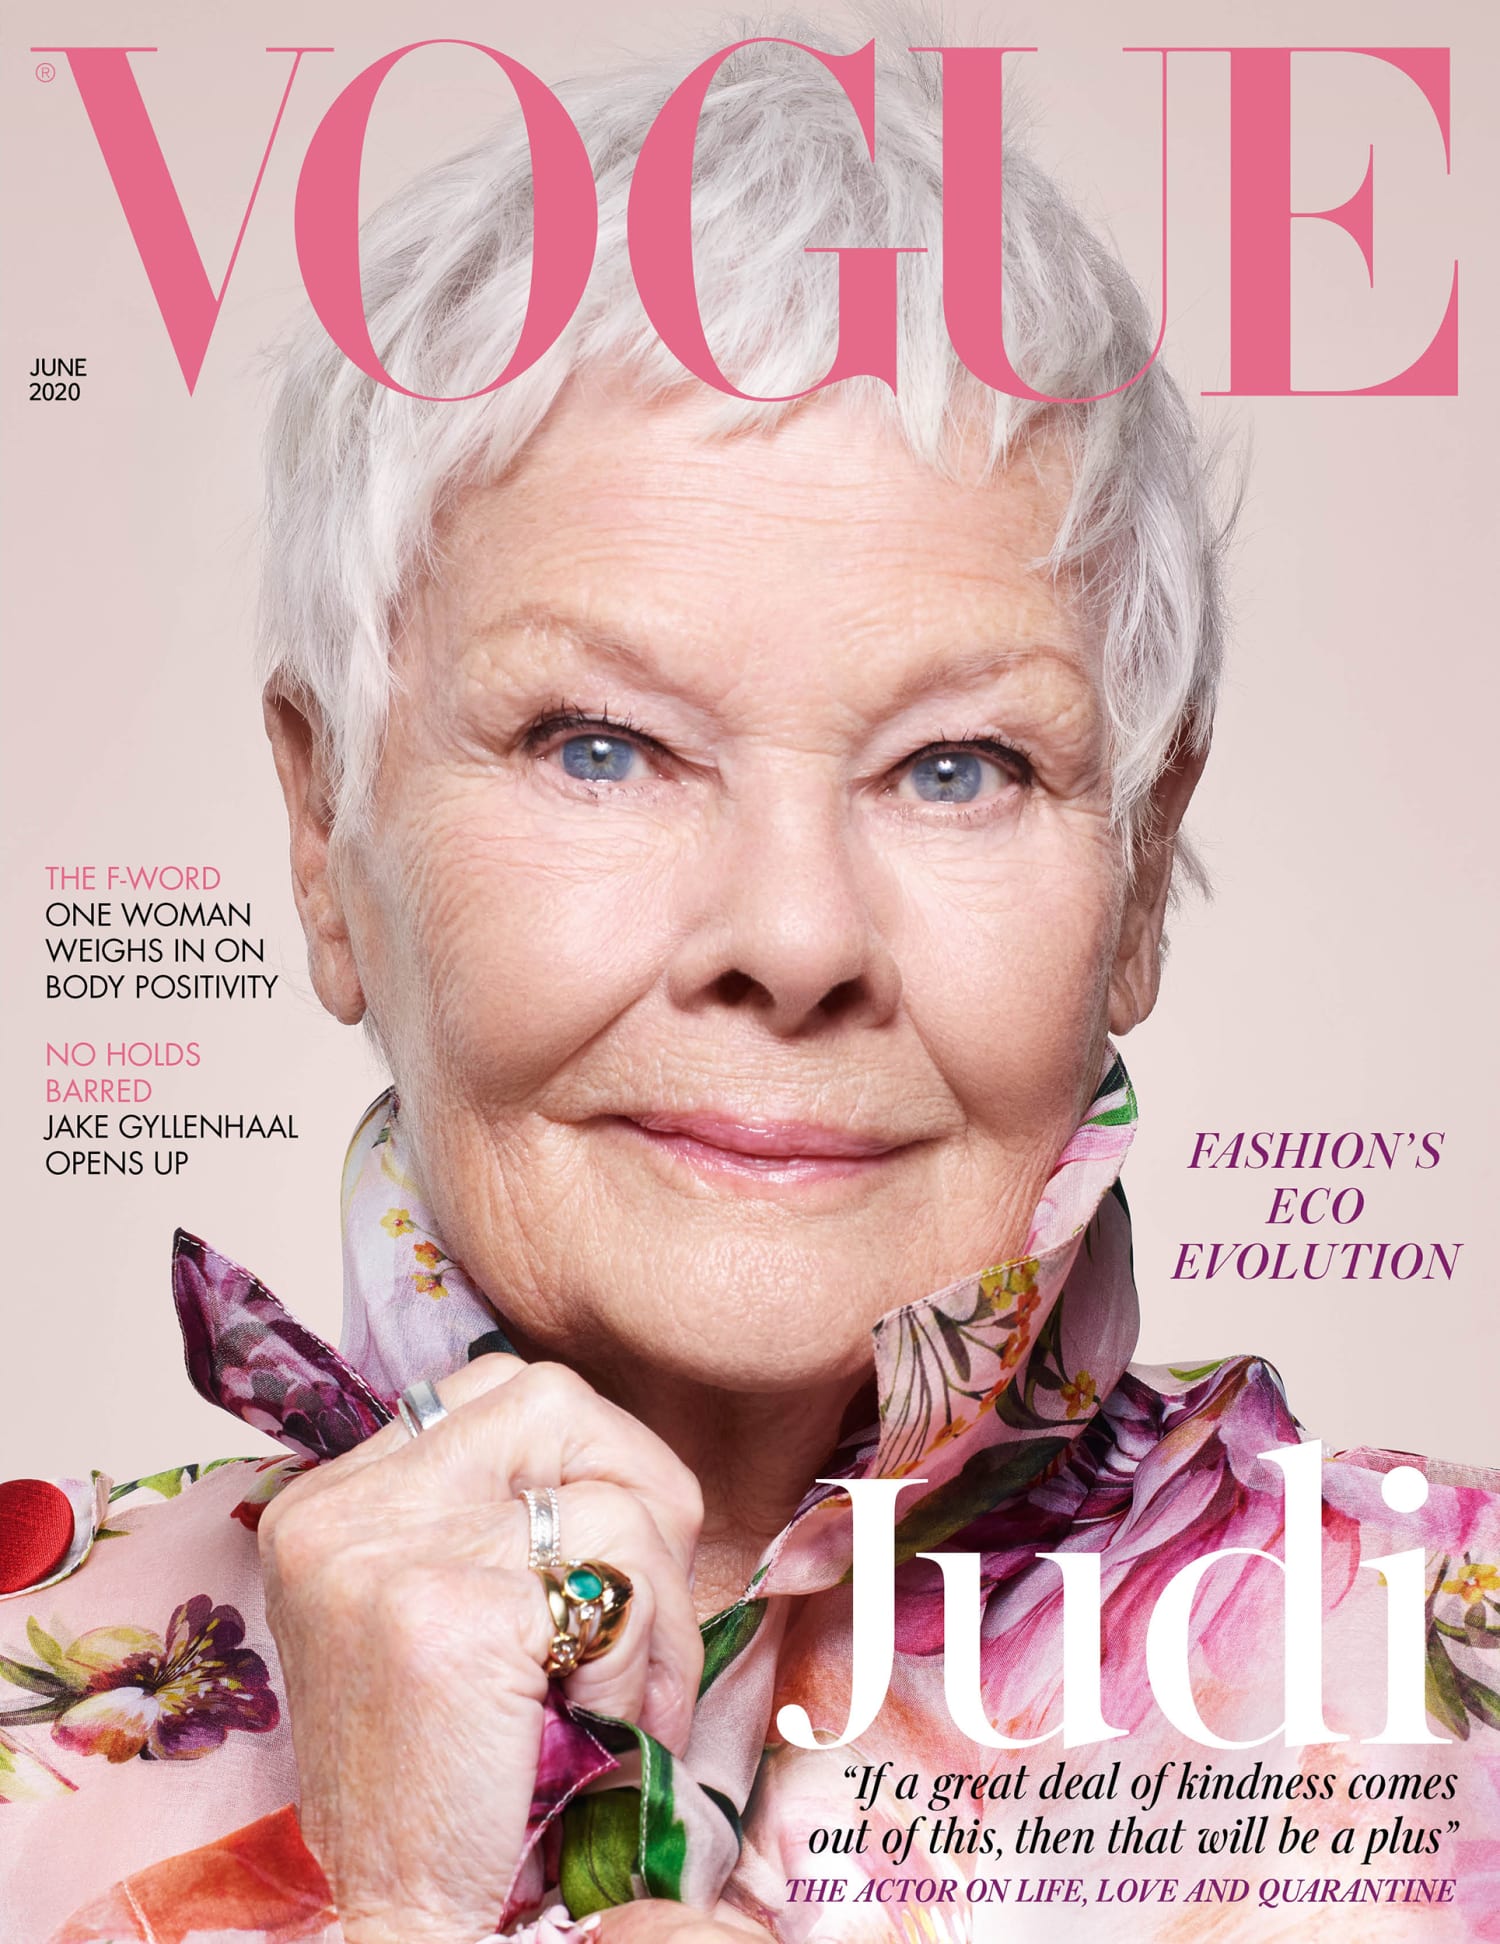 These Vogue Coronavirus Covers May Be Their Most Iconic Yet